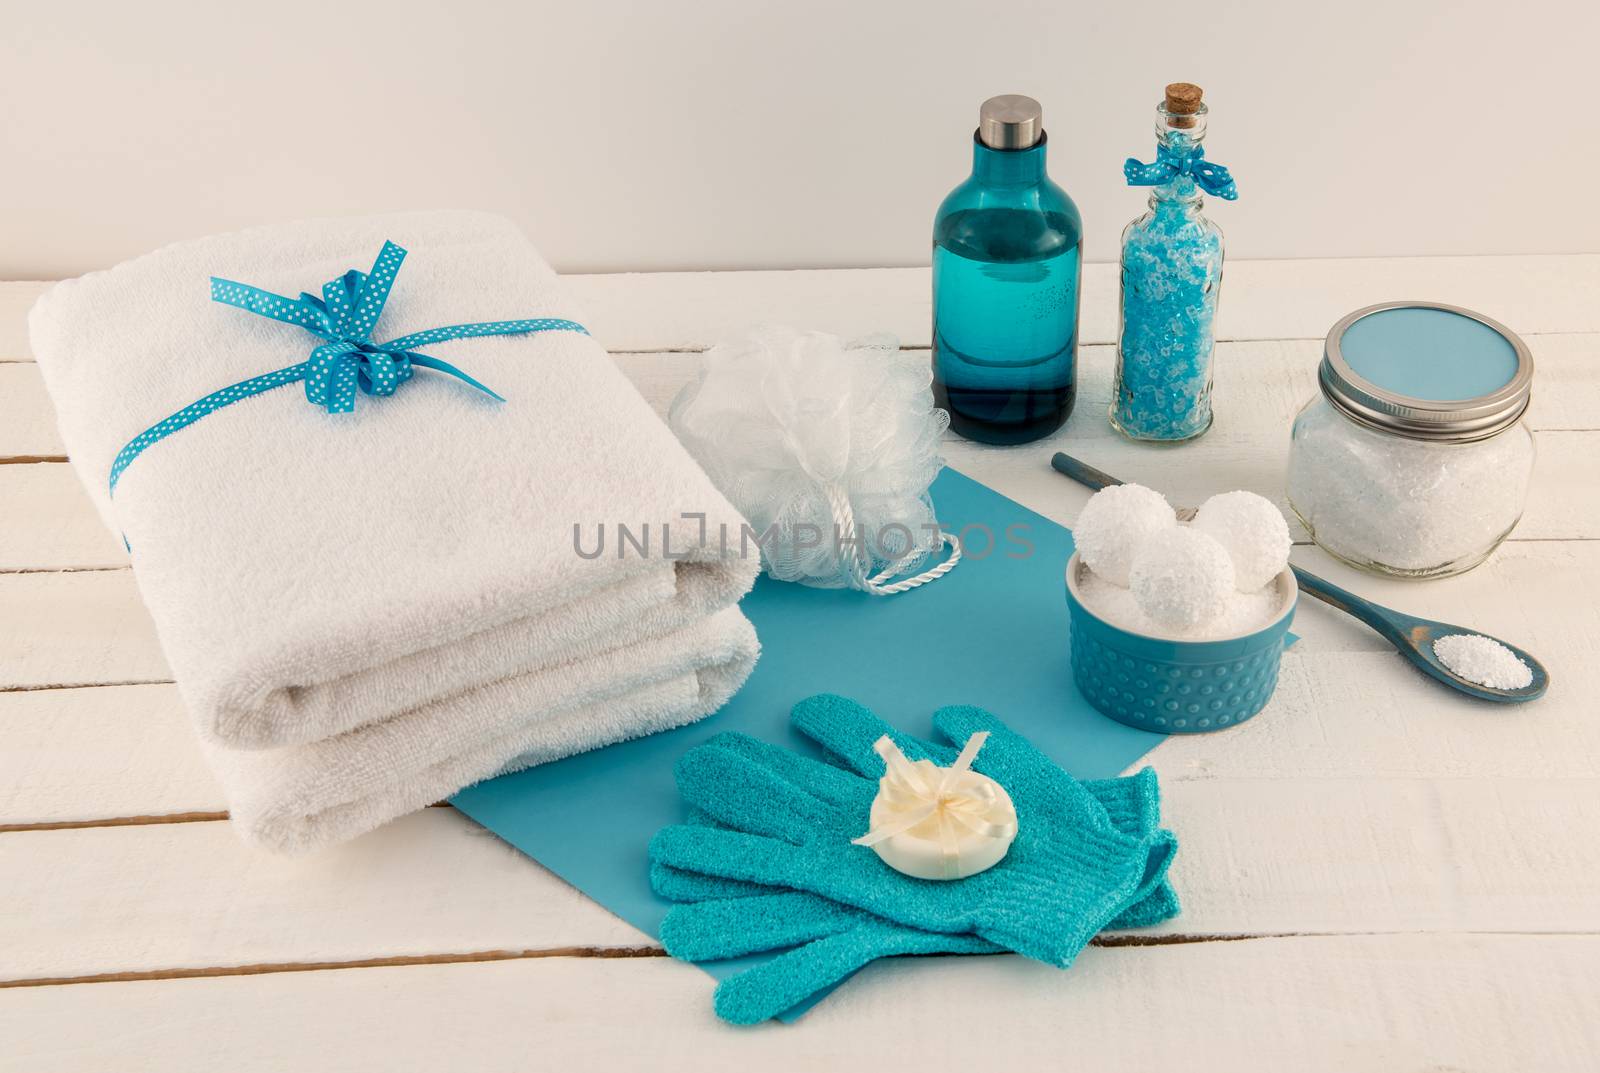 Pampering Bath Items by krisblackphotography